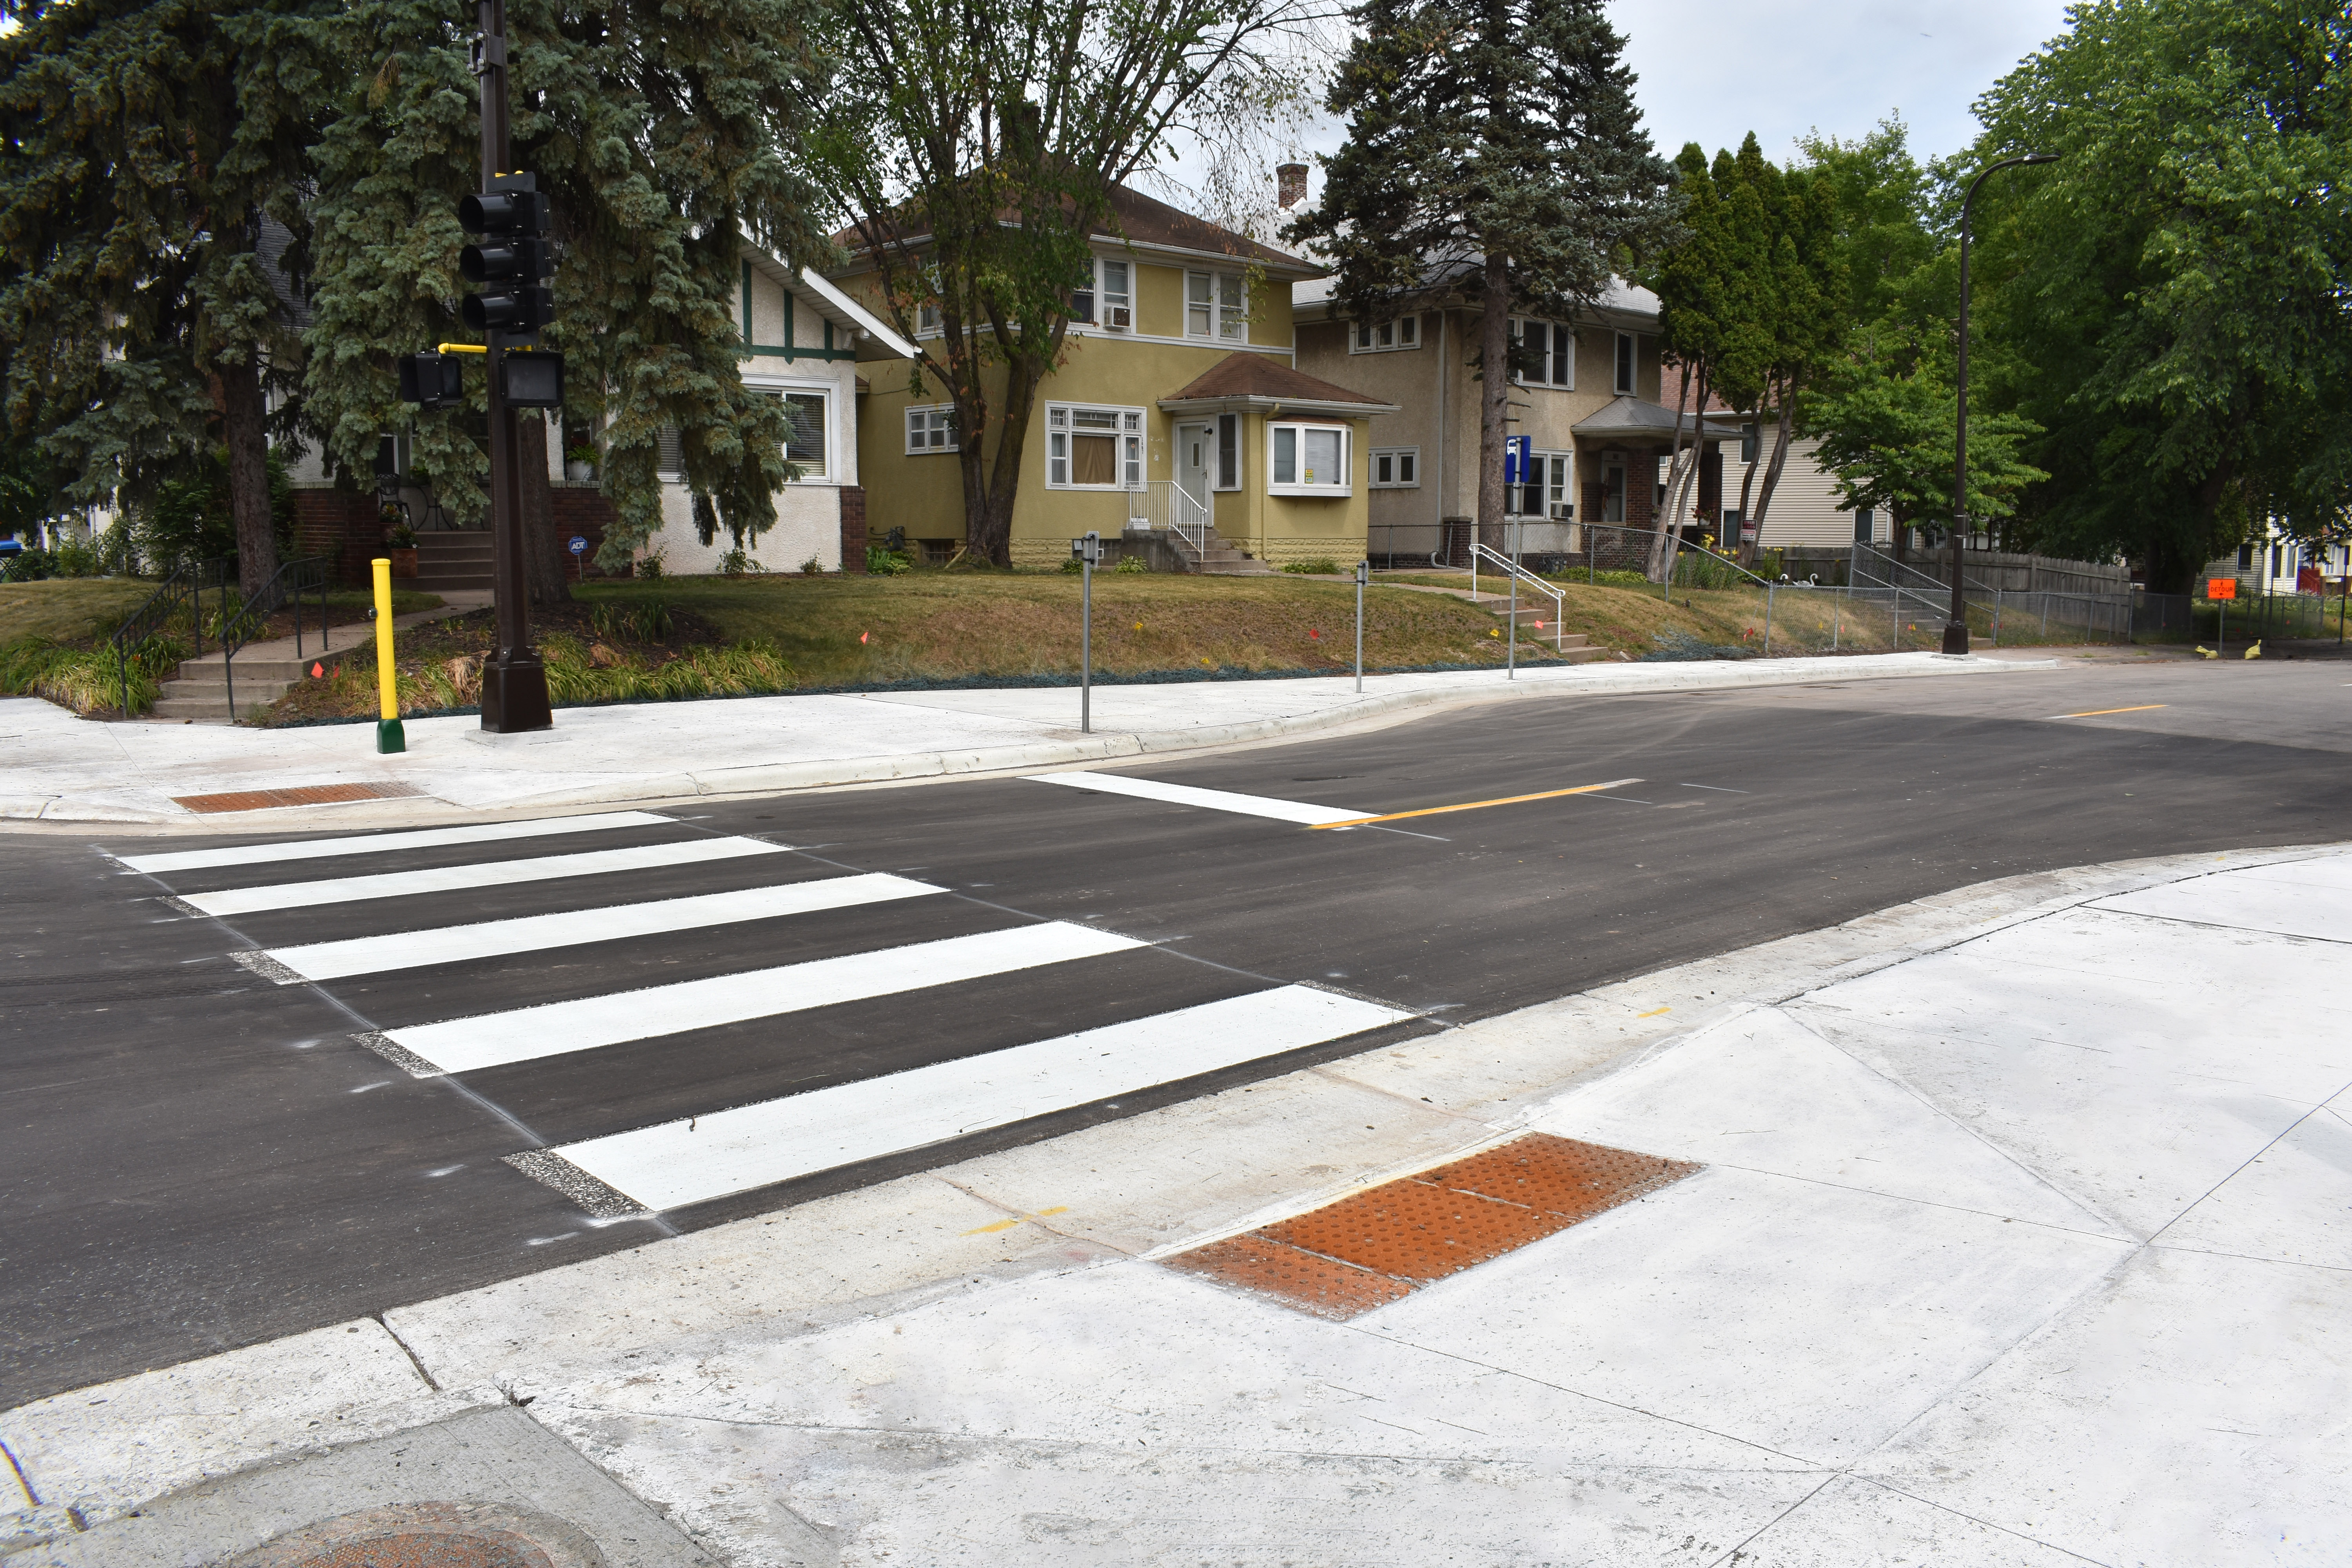 Concrete curb extensions or "bump-outs" on Penn Avenue at the 14th Street intersections to reduce crosswalk distance and improve access for people walking and rolling.